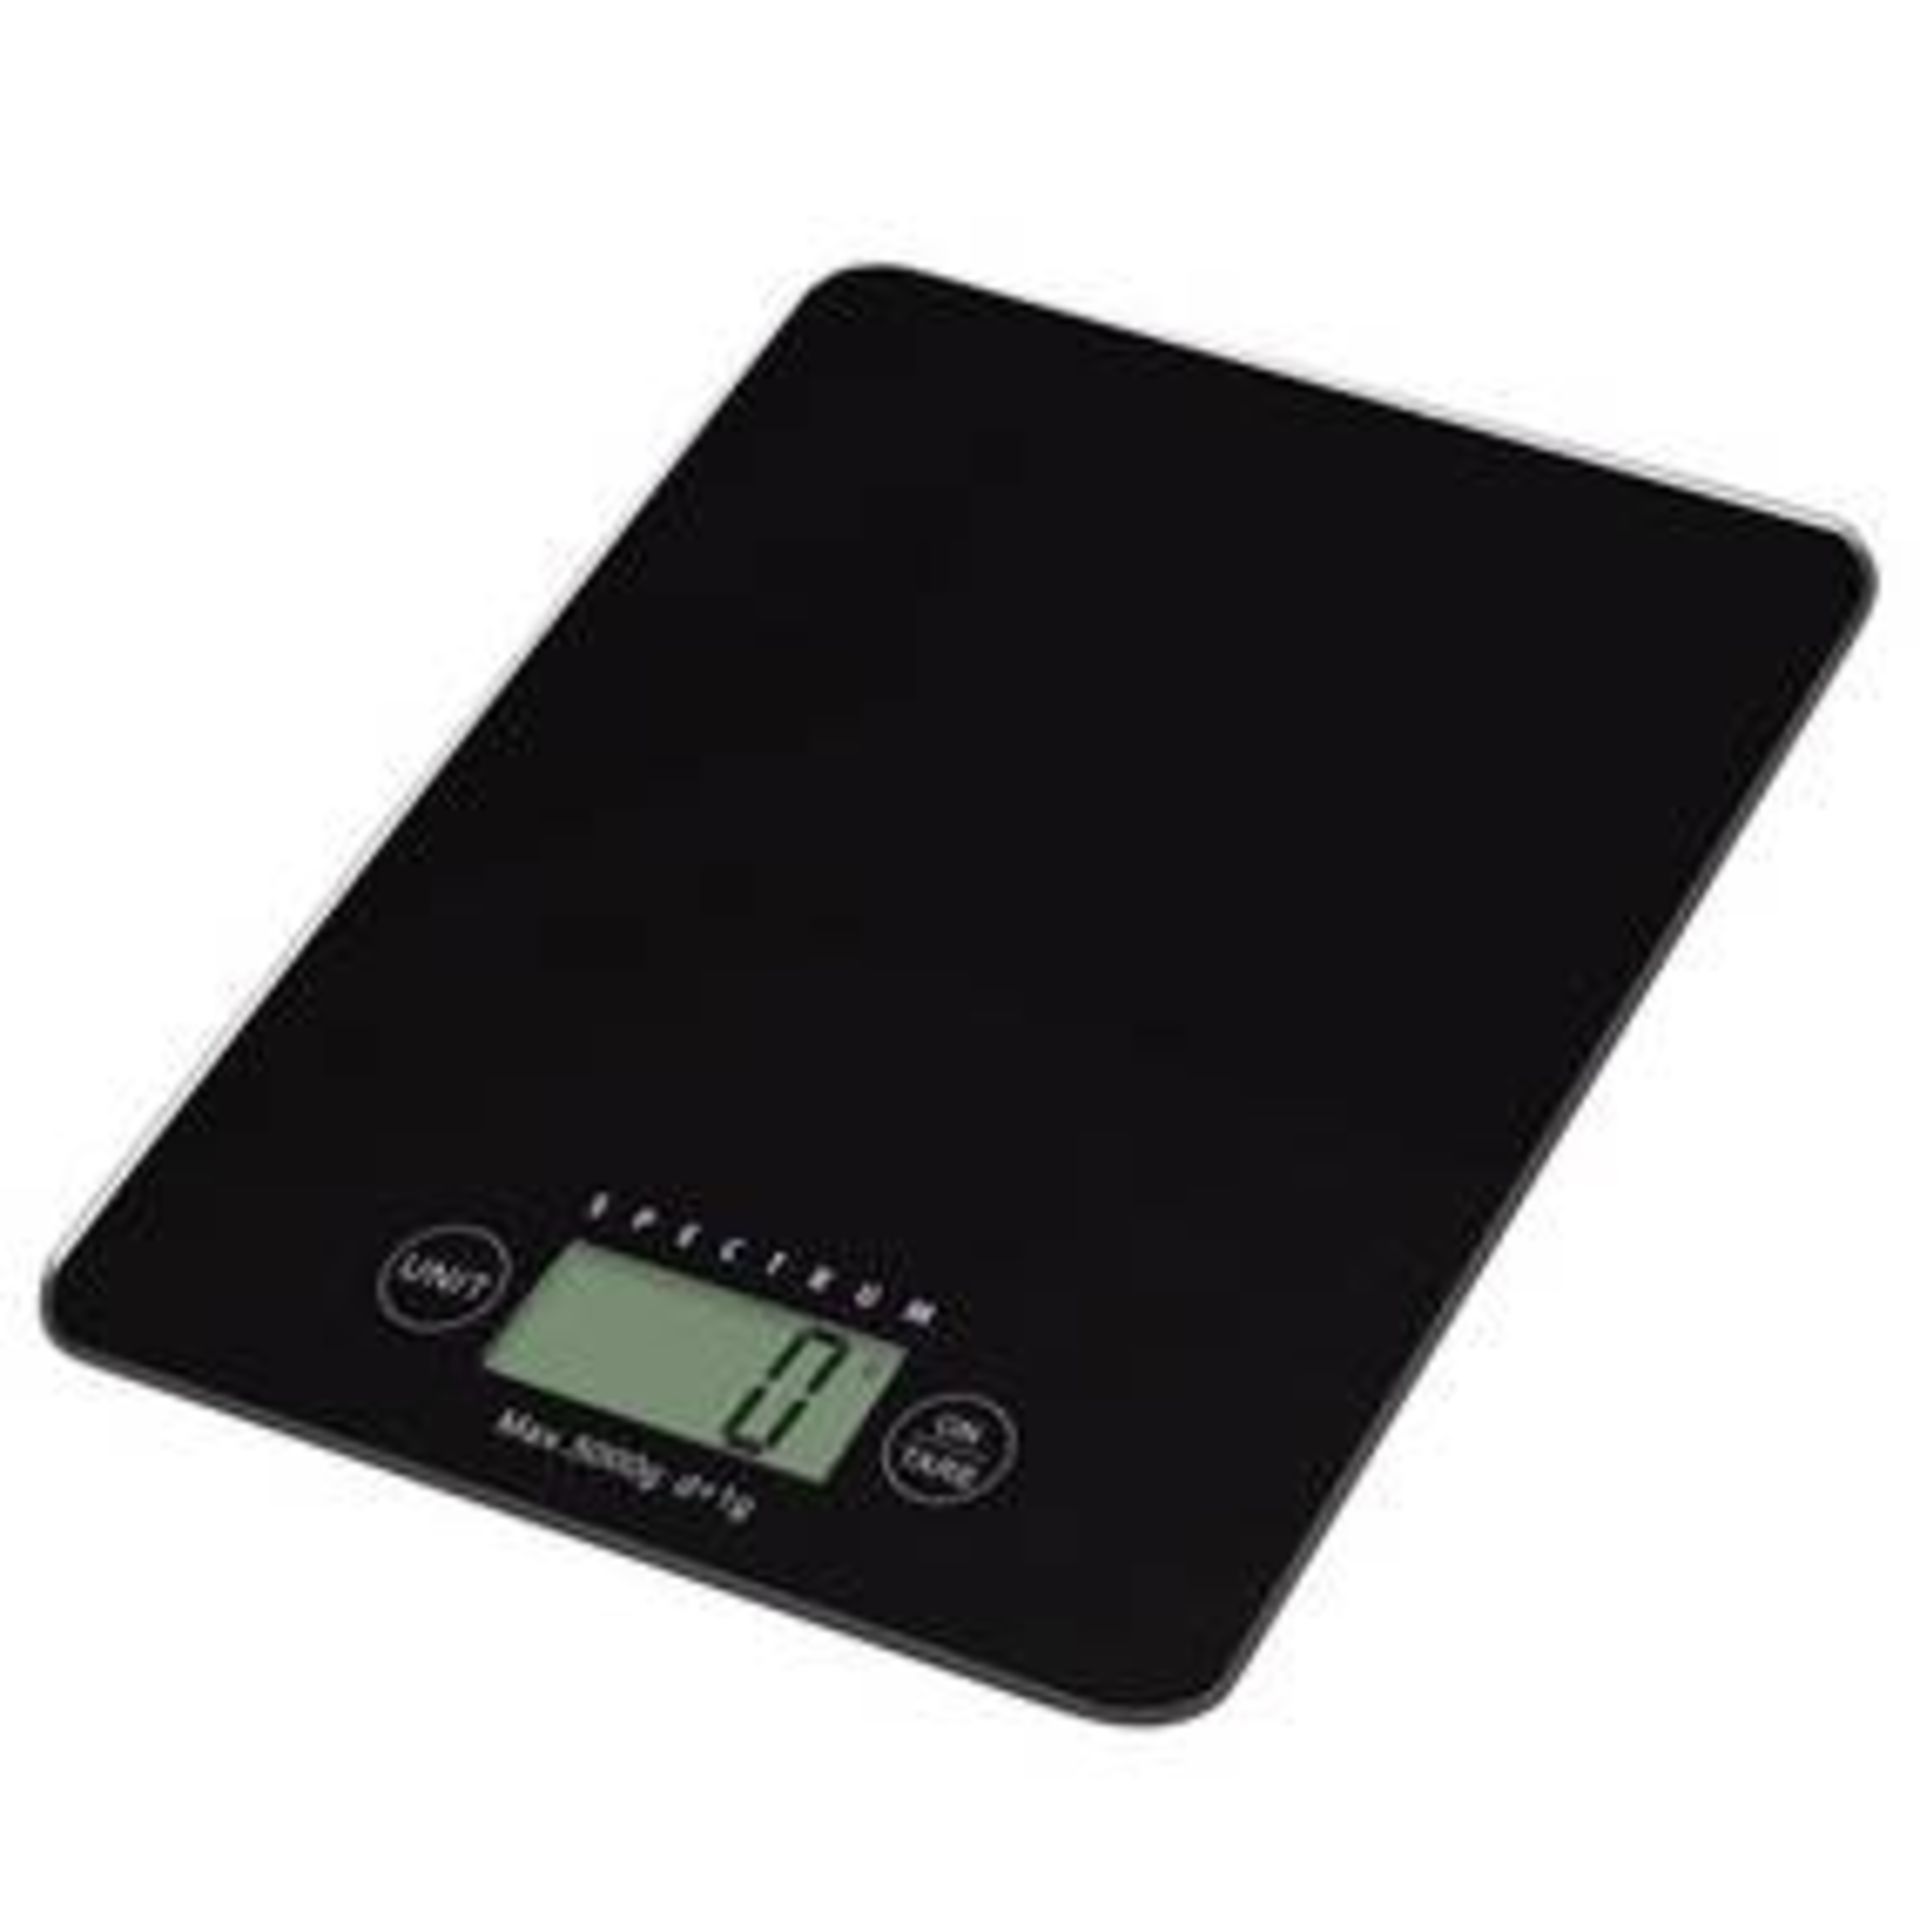 V Brand New Kitchen Collection Digital Kitchen Scales-Large LCD Display-Stainless Steel Weighing - Image 2 of 4